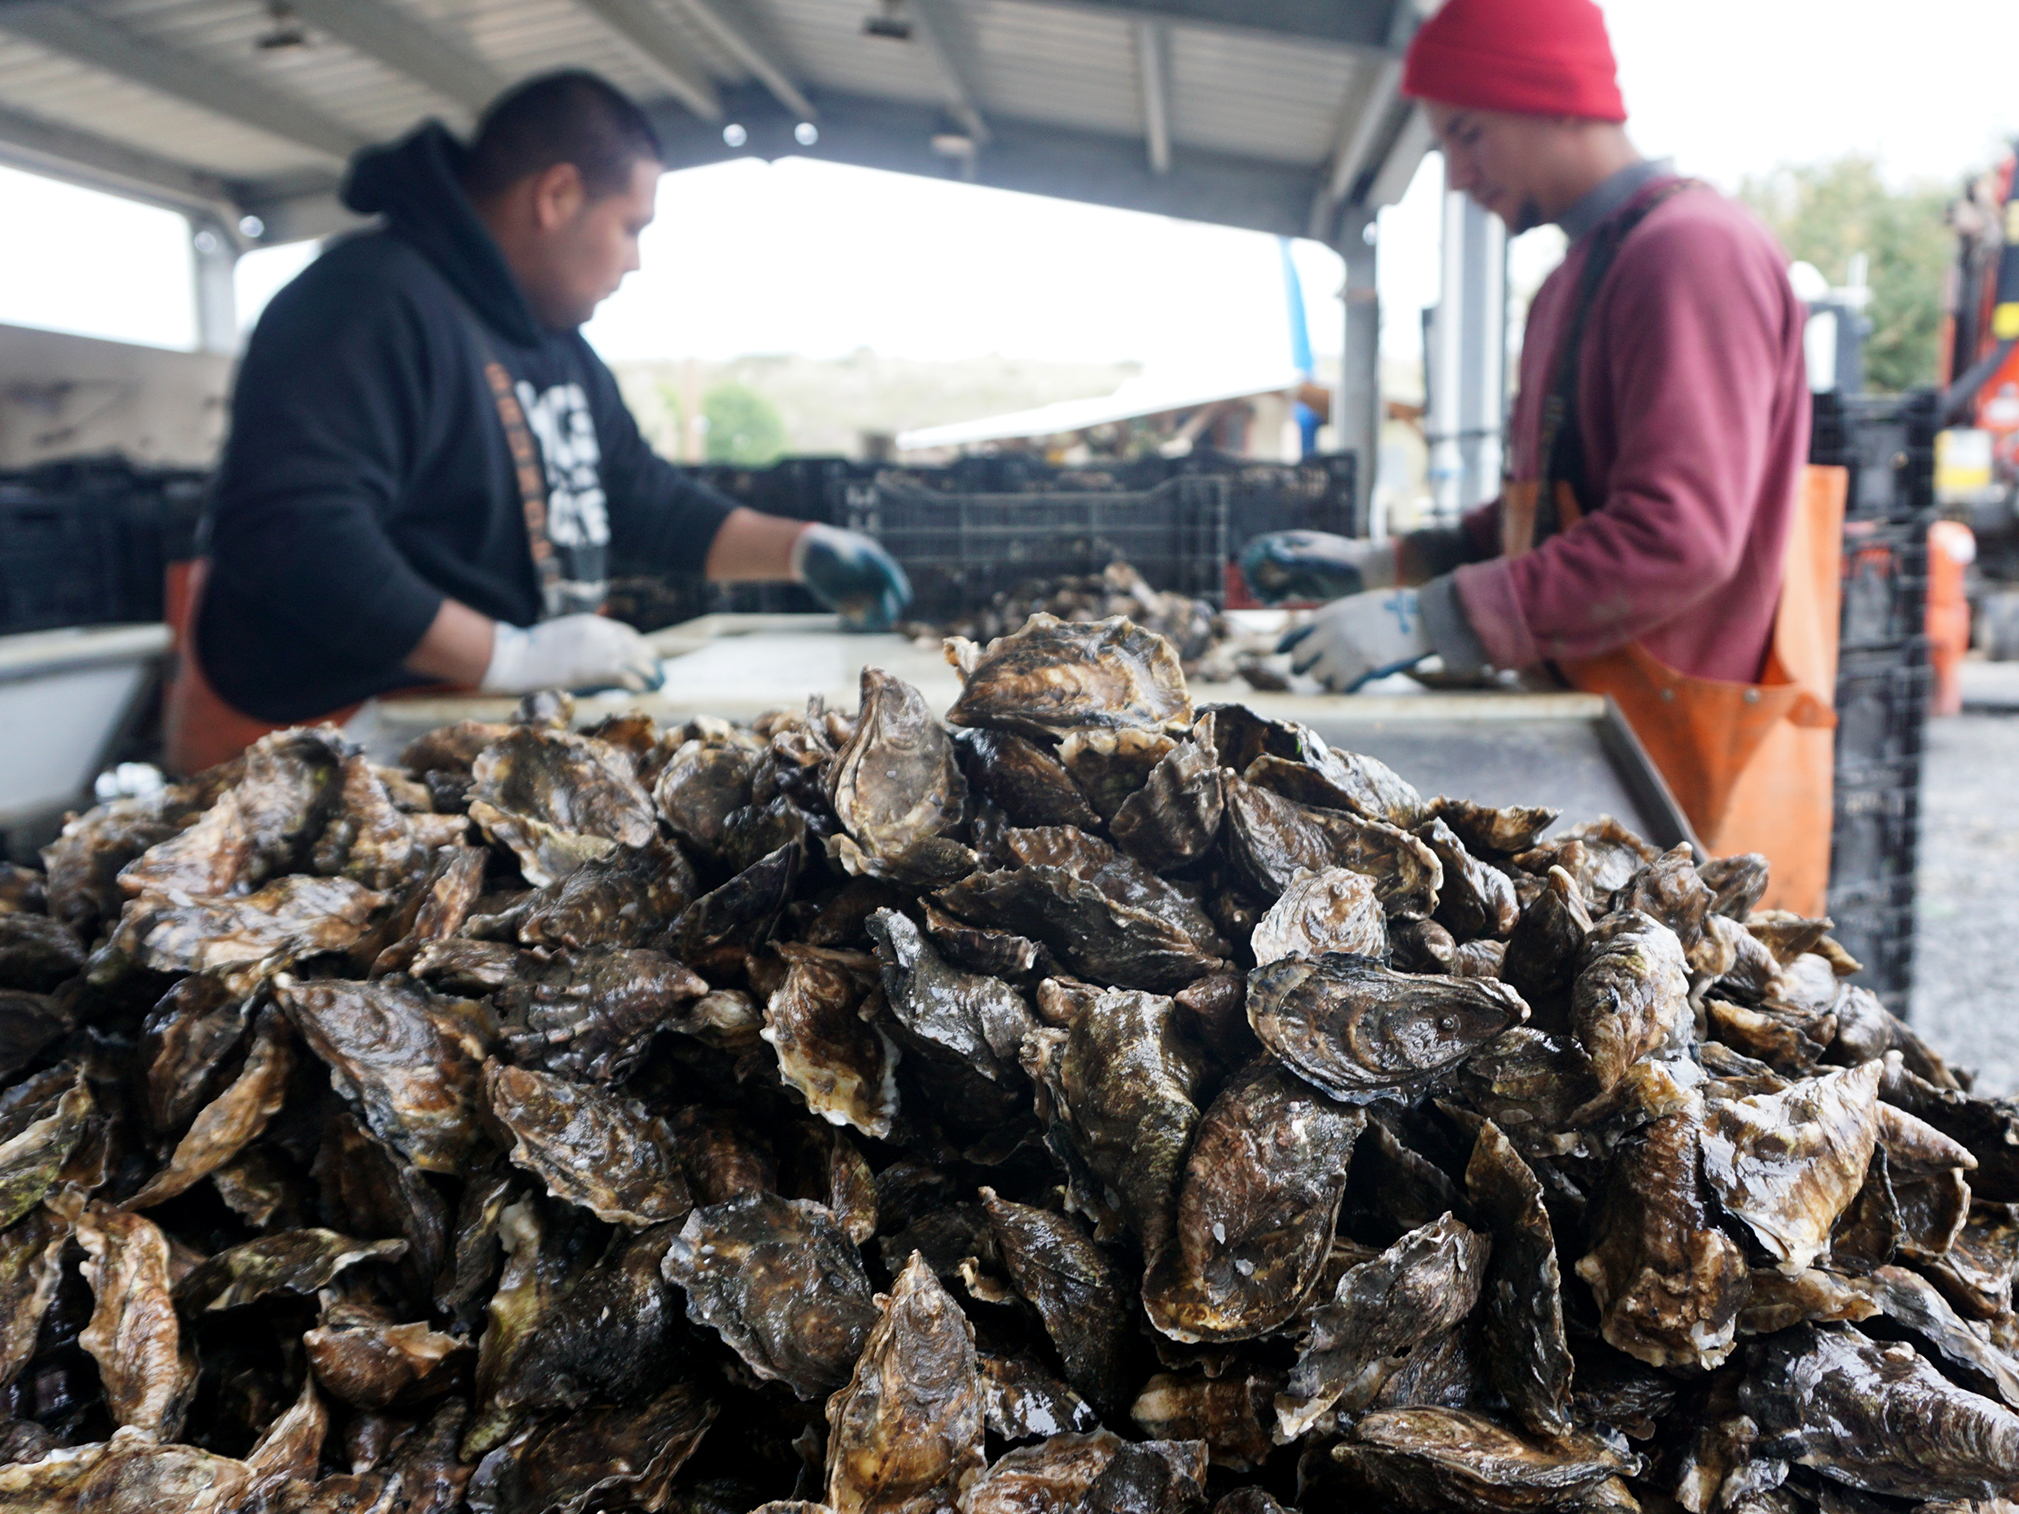 Workers sort fresh oysters at Hog Island Oyster Company near Tomales Bay, north of San Francisco. (Photo by Lauren Sommer/KQED)